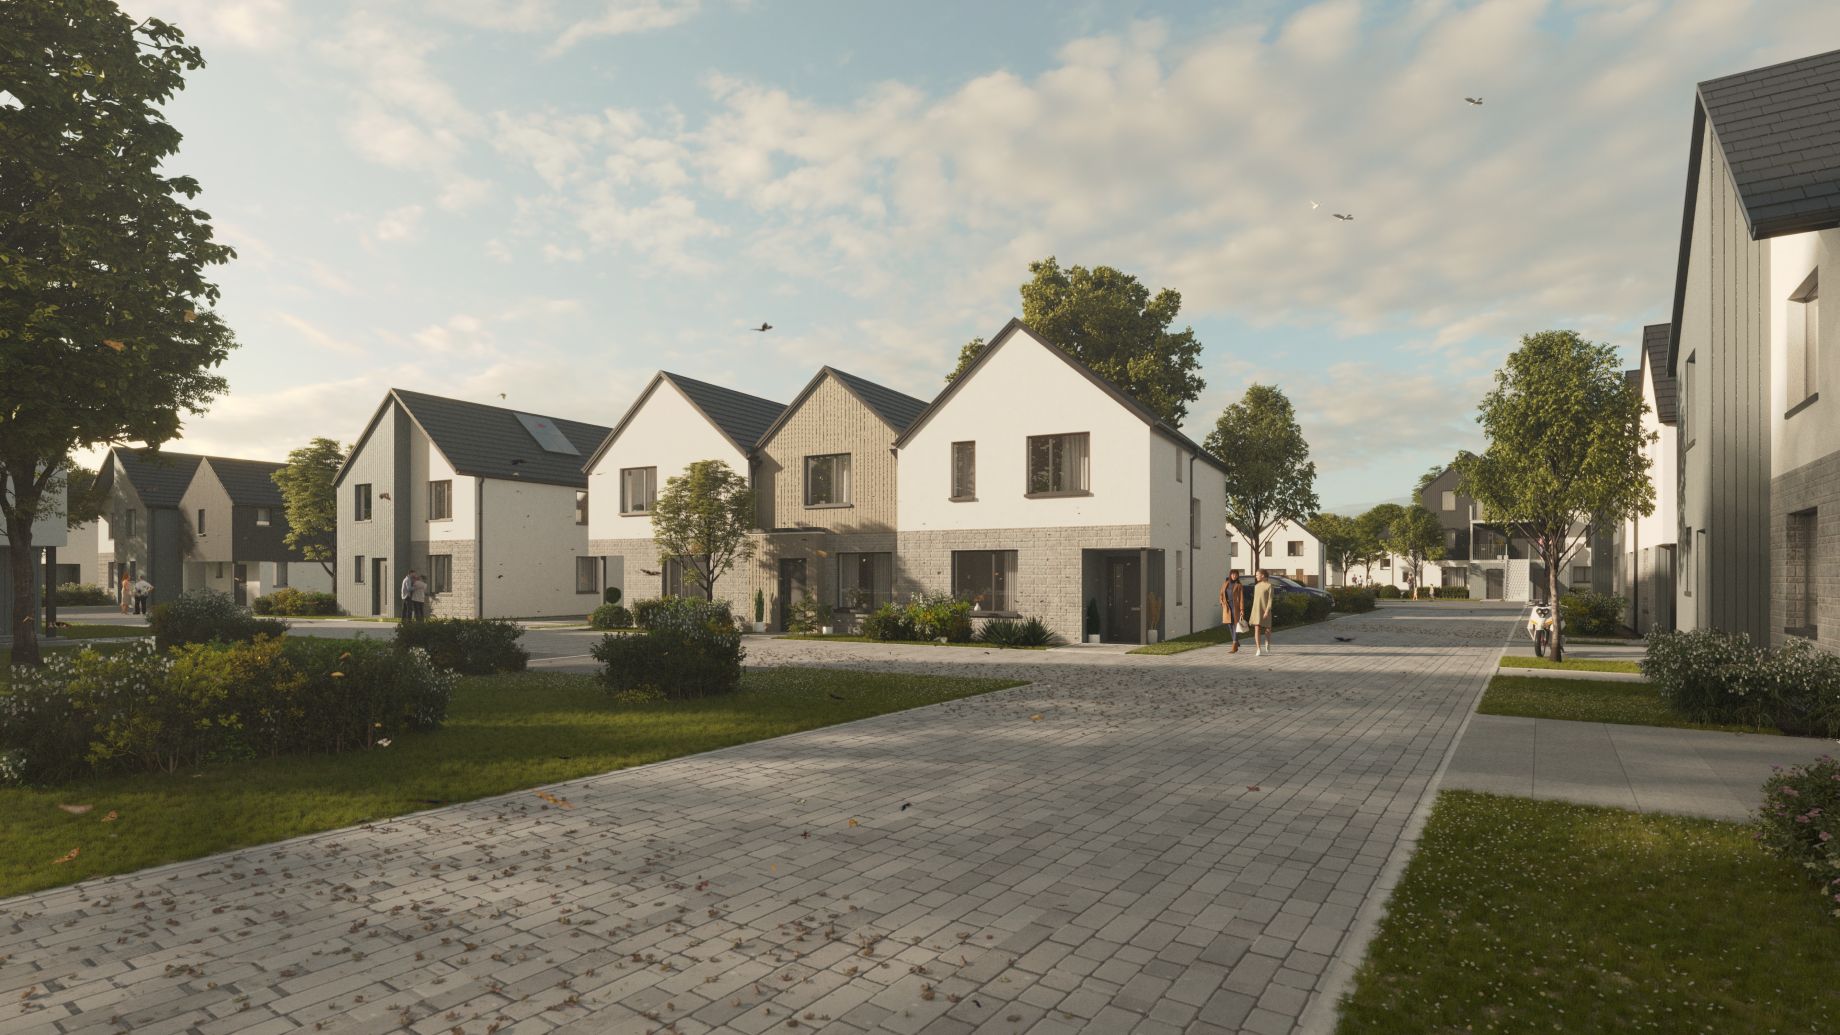 Plans lodged for 117 new homes in Lauder